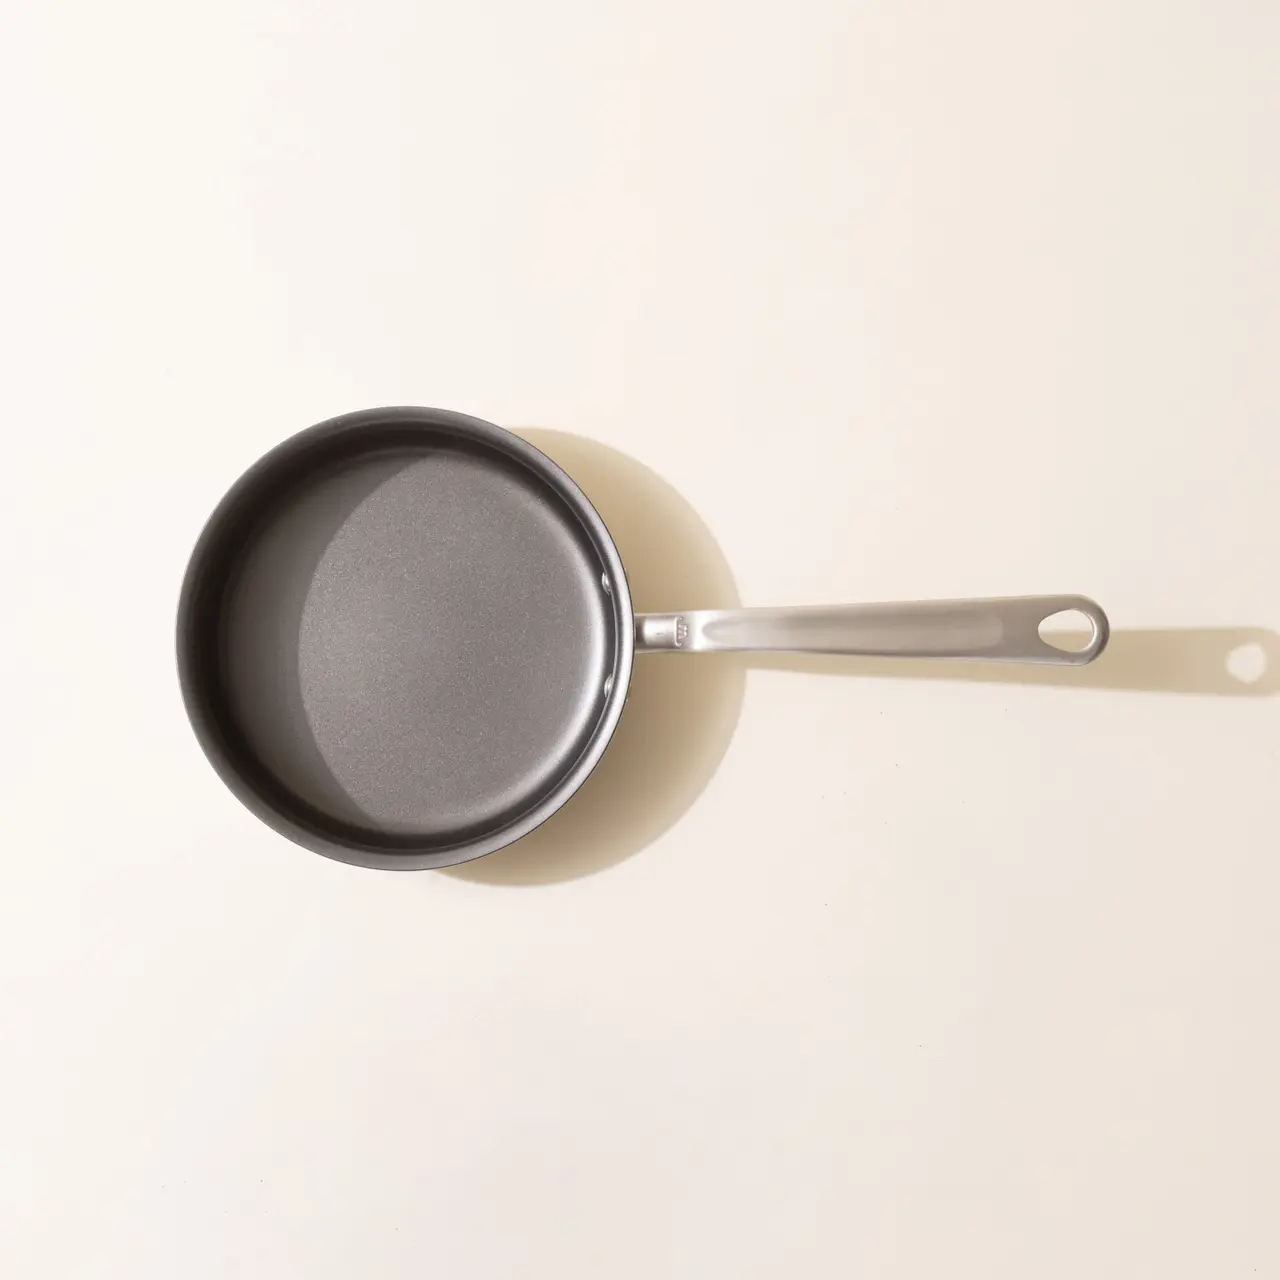 A new frying pan with a silver handle is pictured from above on a neutral background.